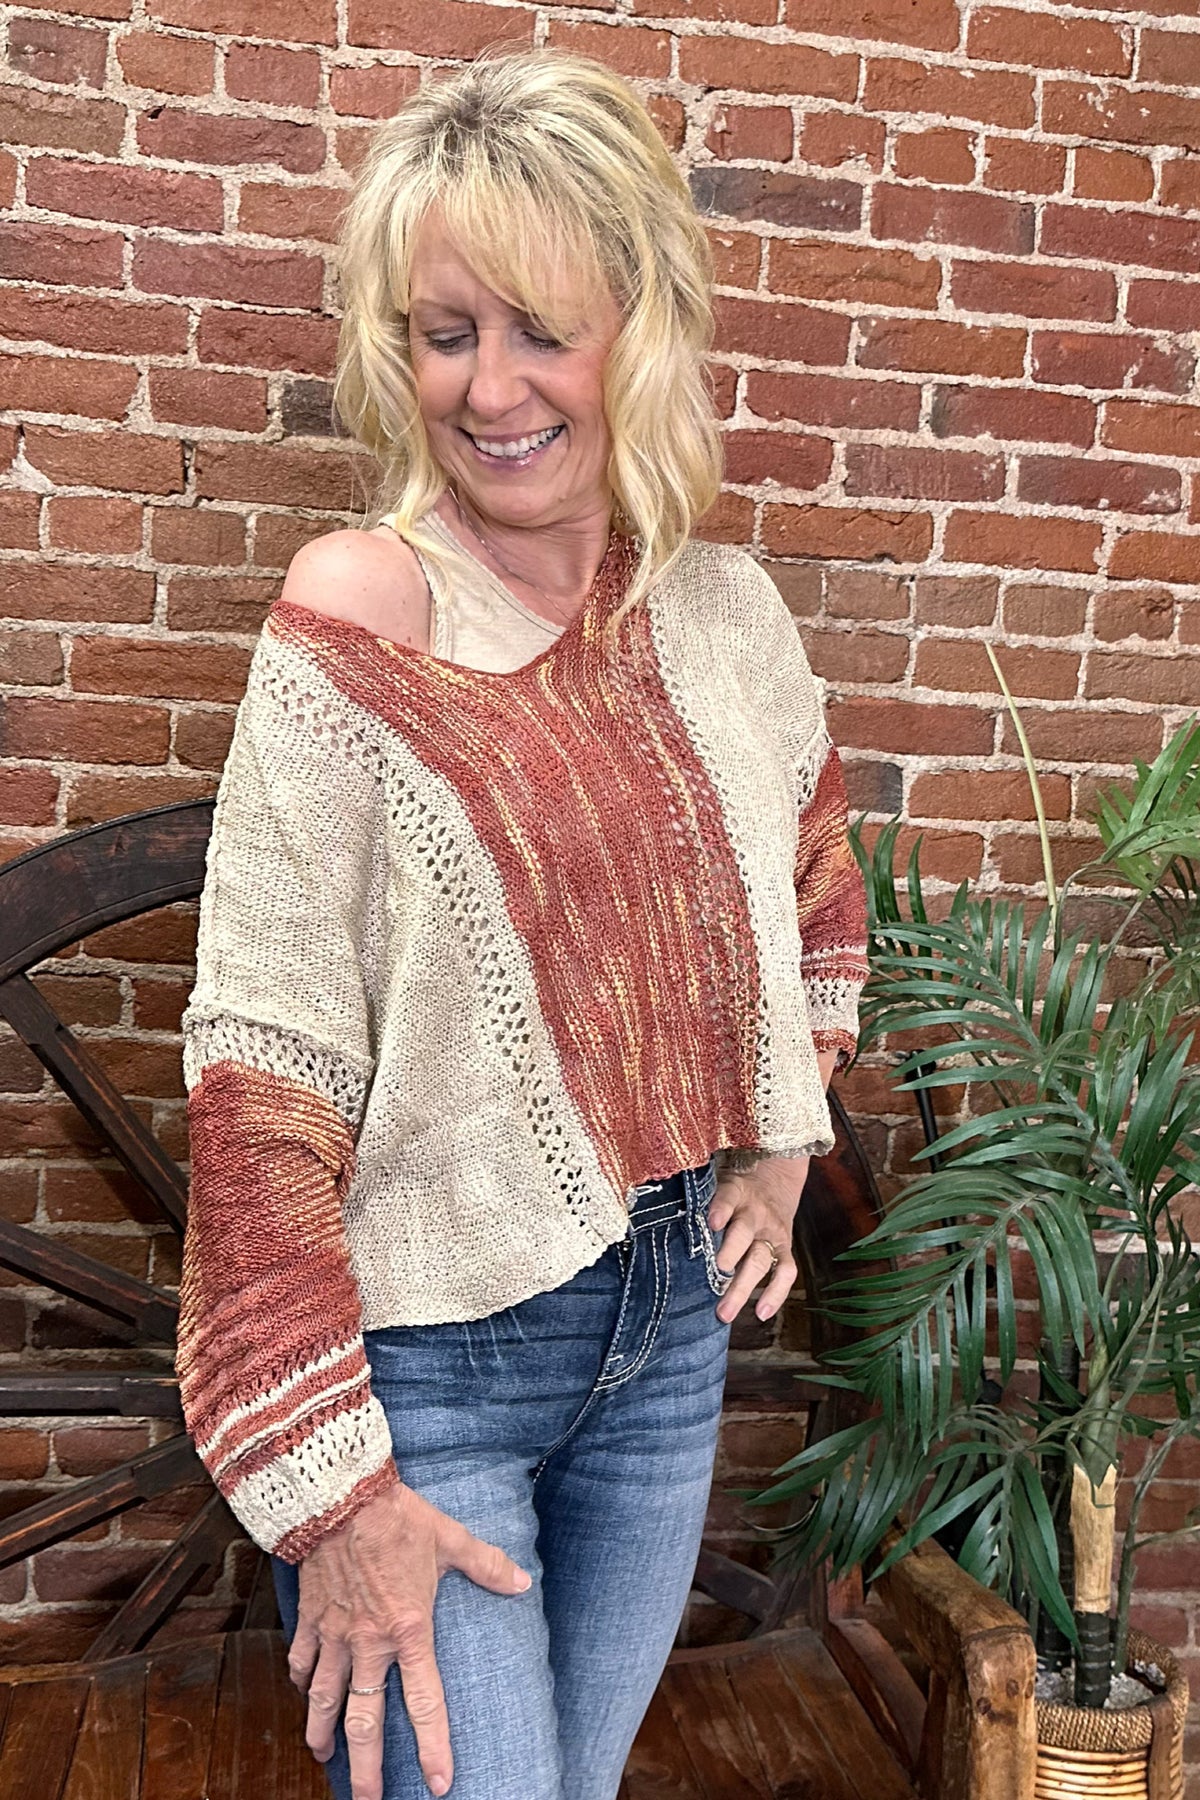 Tan Crop Pull Over Sweater By Angie-Sweater-Angie-Gallop 'n Glitz- Women's Western Wear Boutique, Located in Grants Pass, Oregon